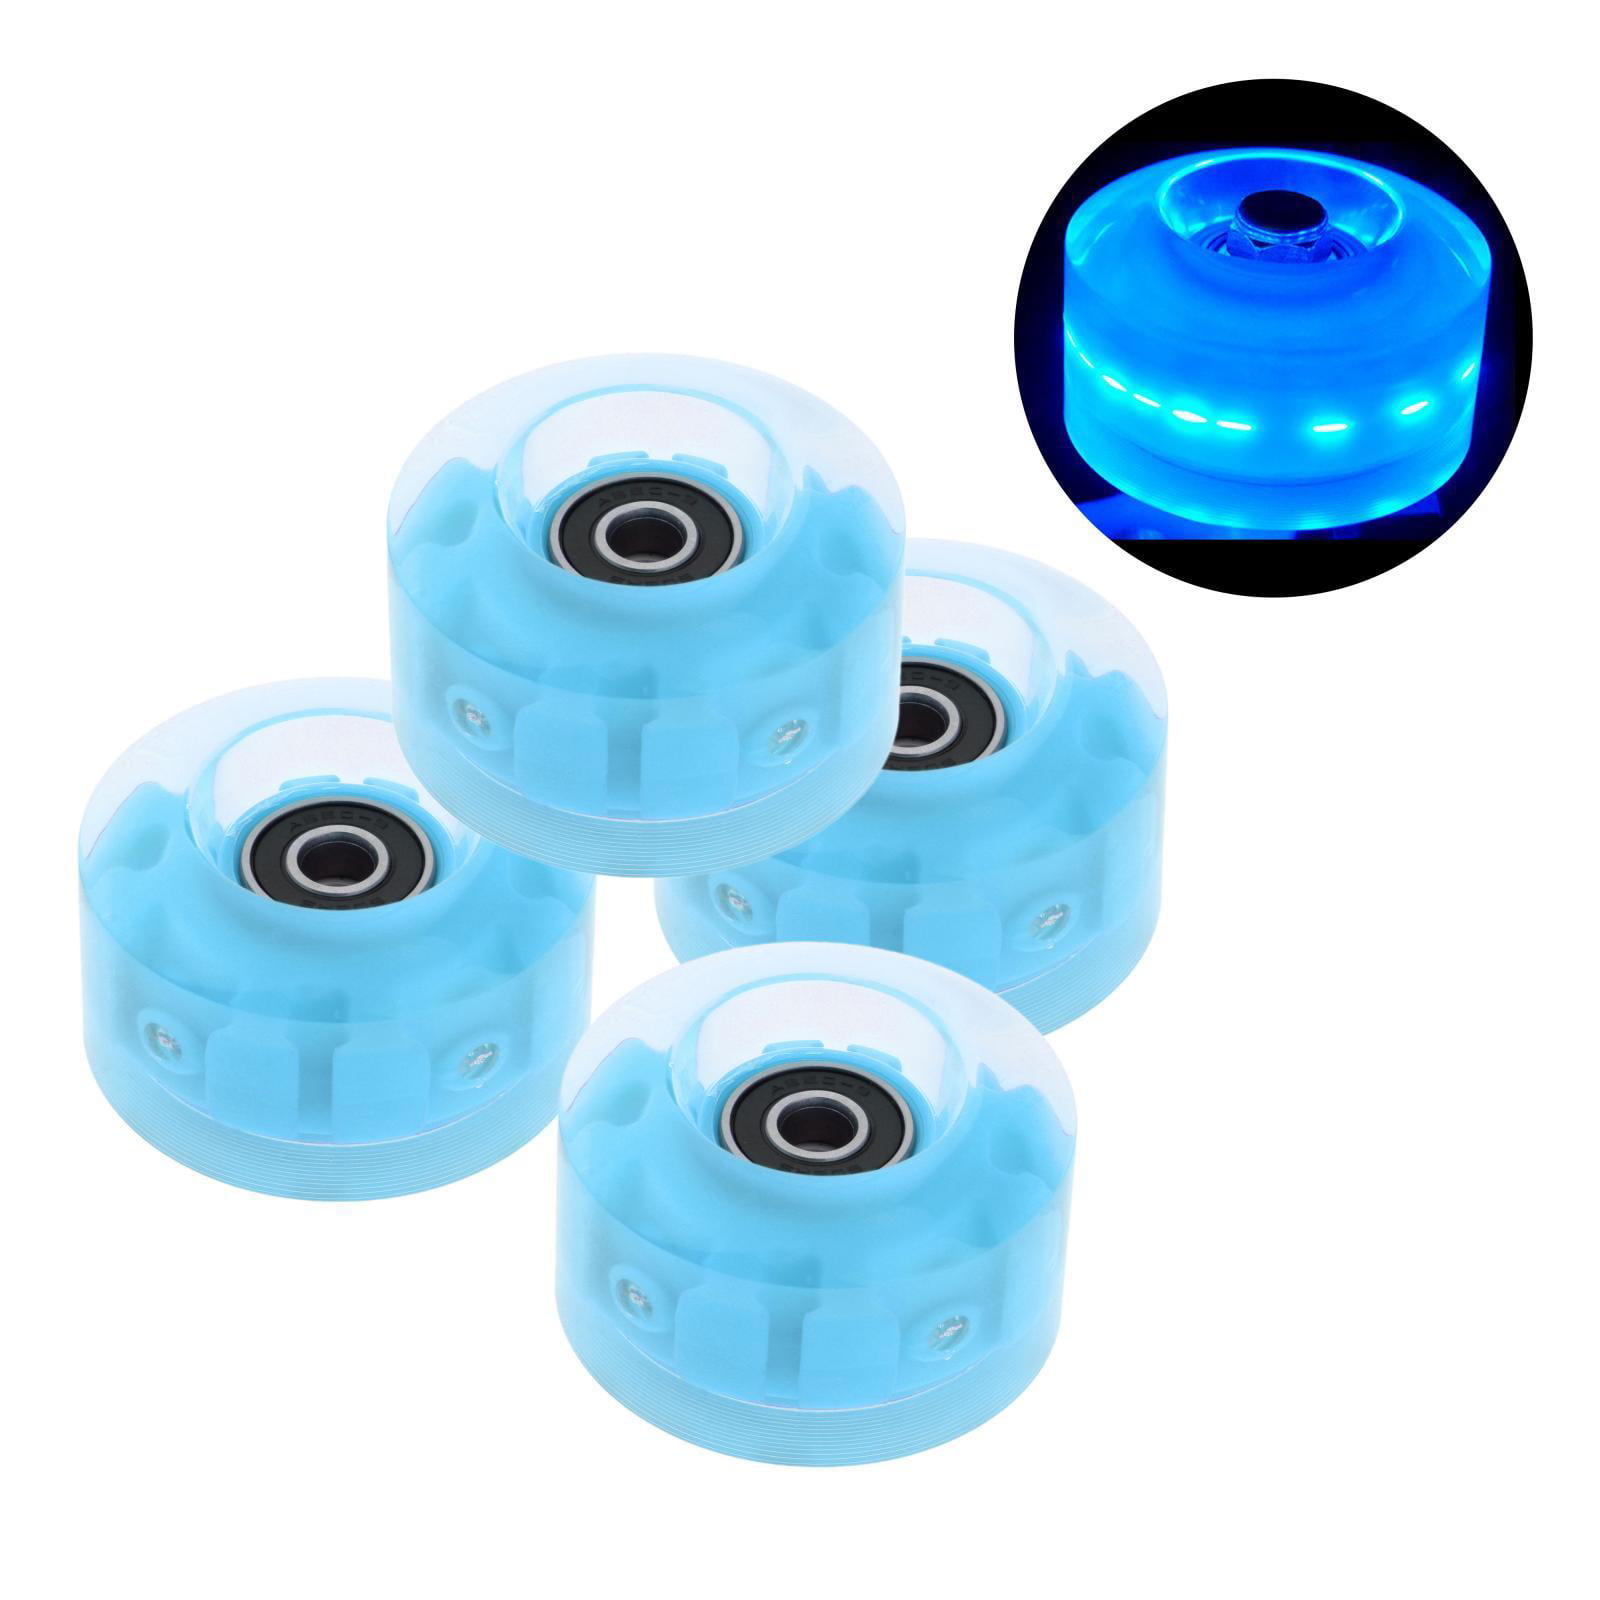 Details about   4x Quad Roller Skate Wheel Light Up for Double Row Skating Cruiser Longboard AU 